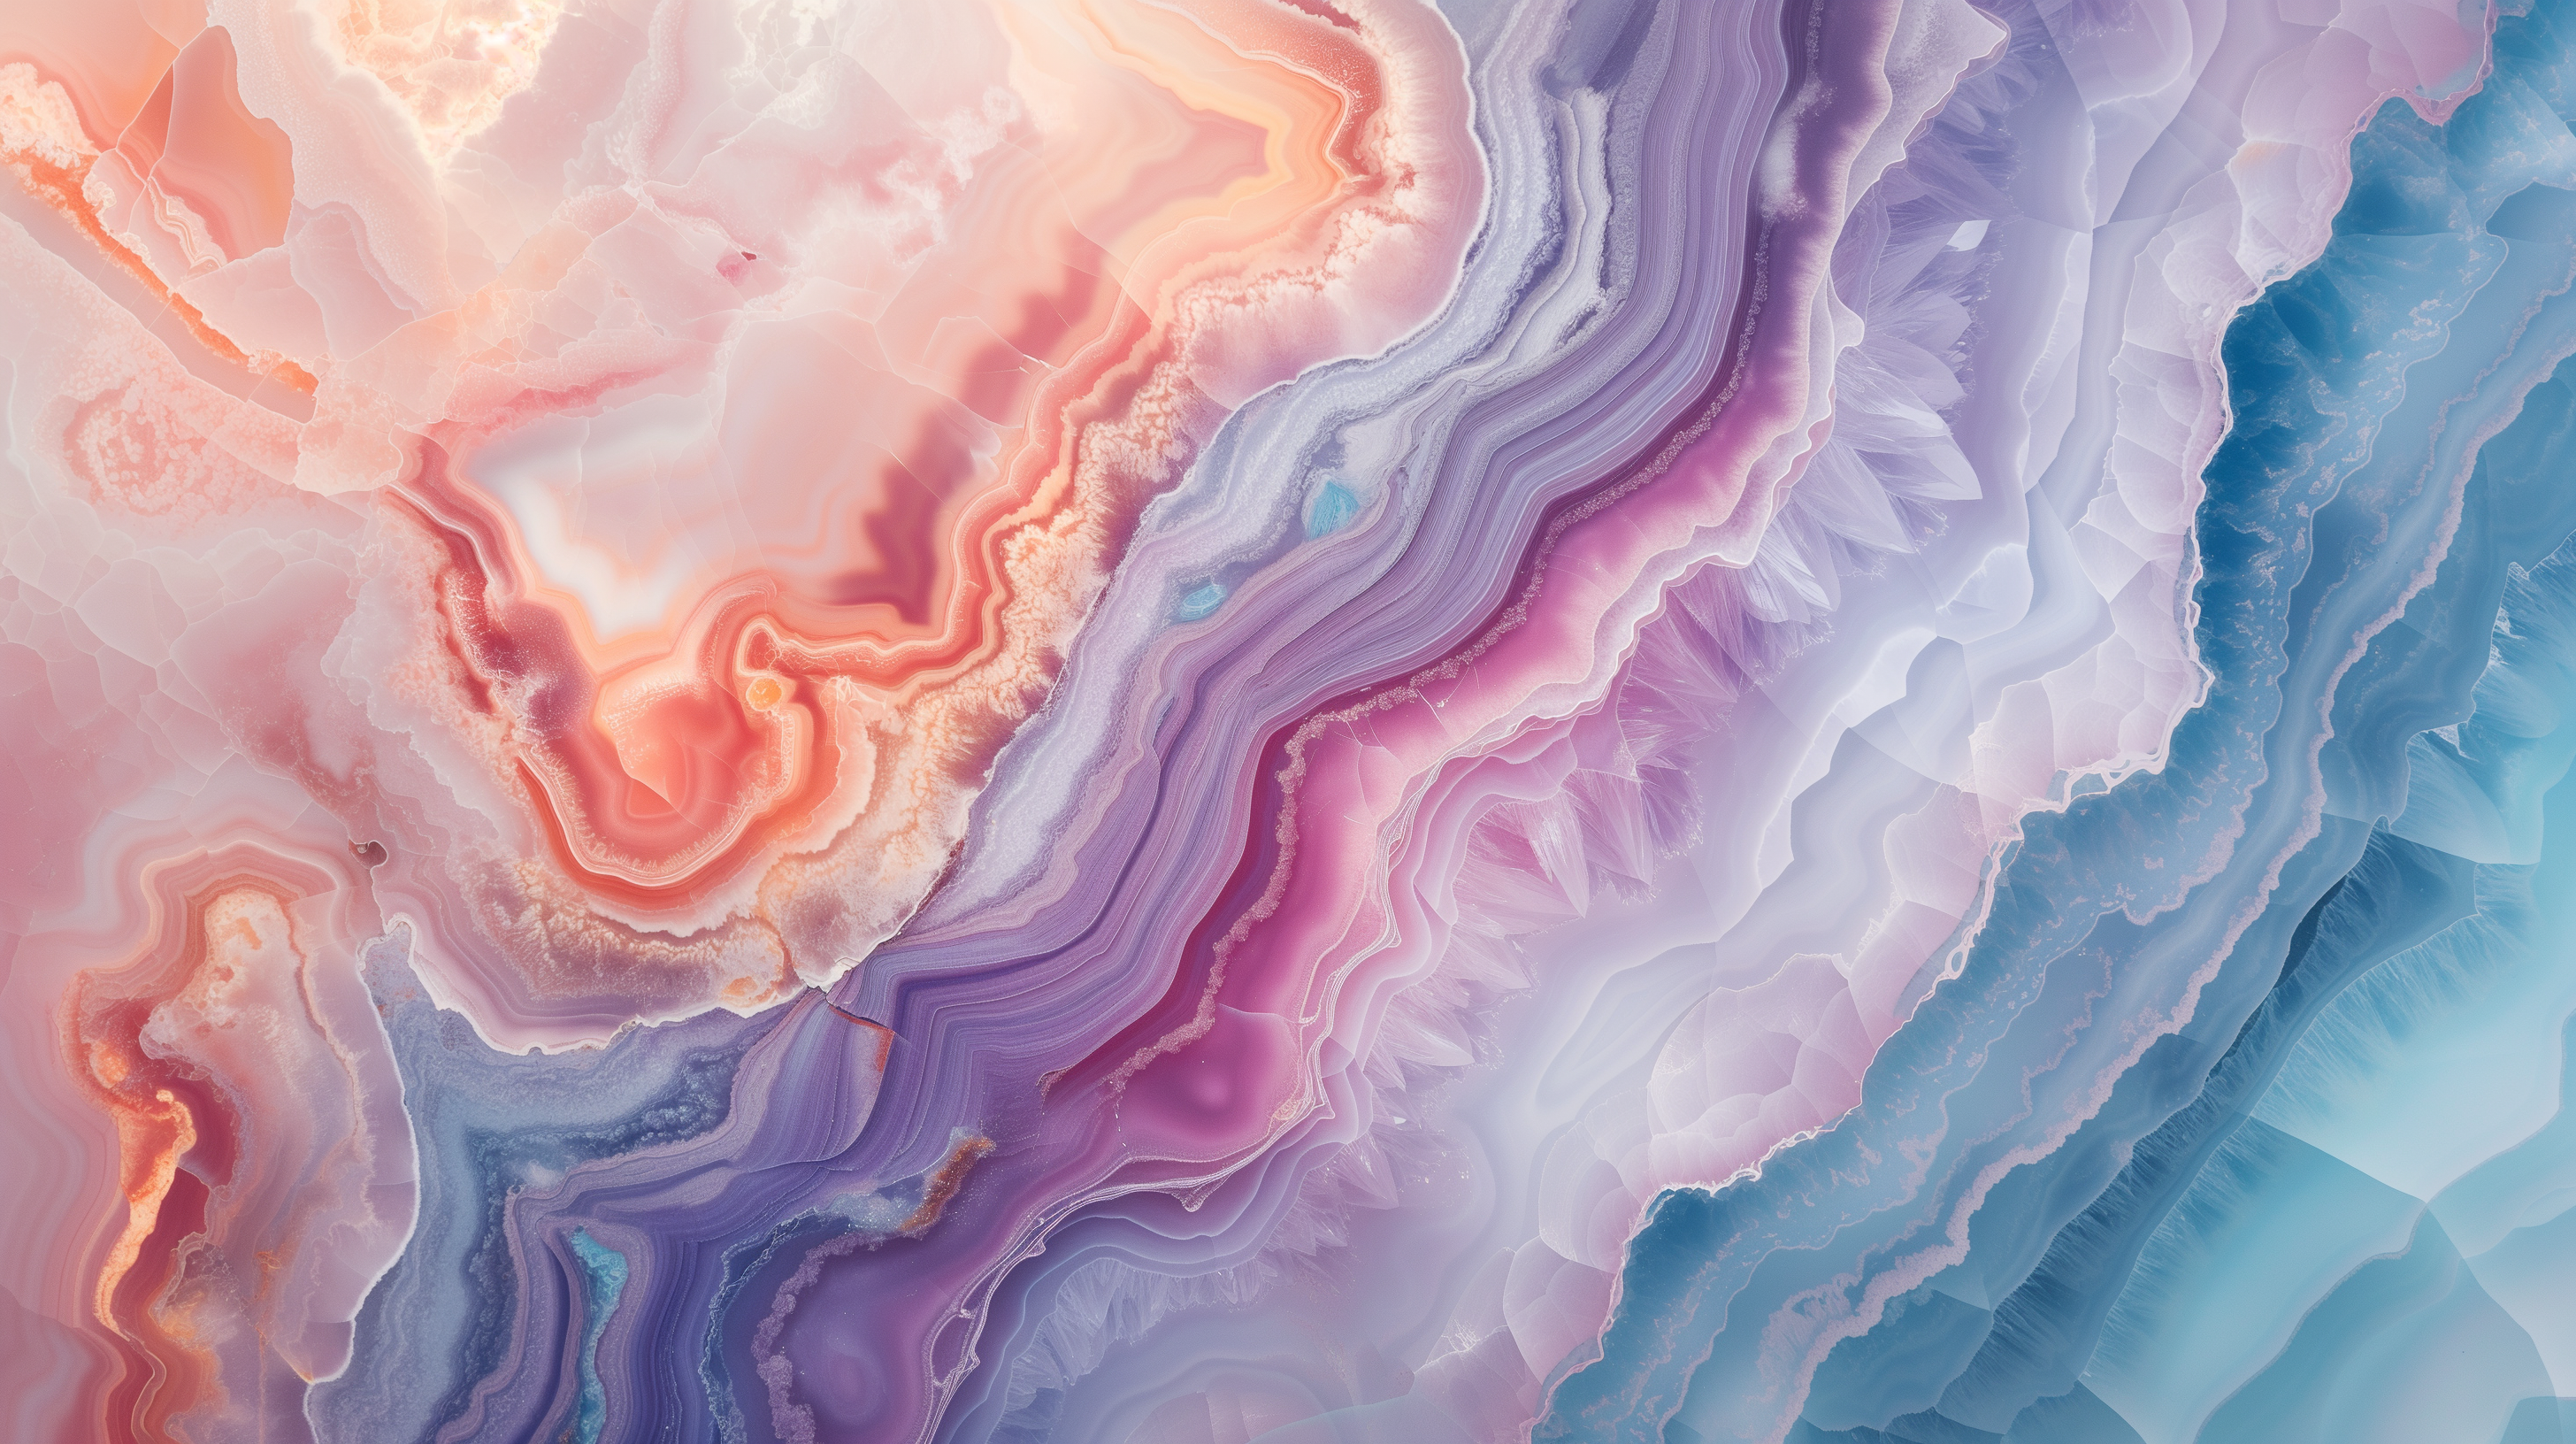 HD wallpaper featuring colorful geode patterns for desktop background.